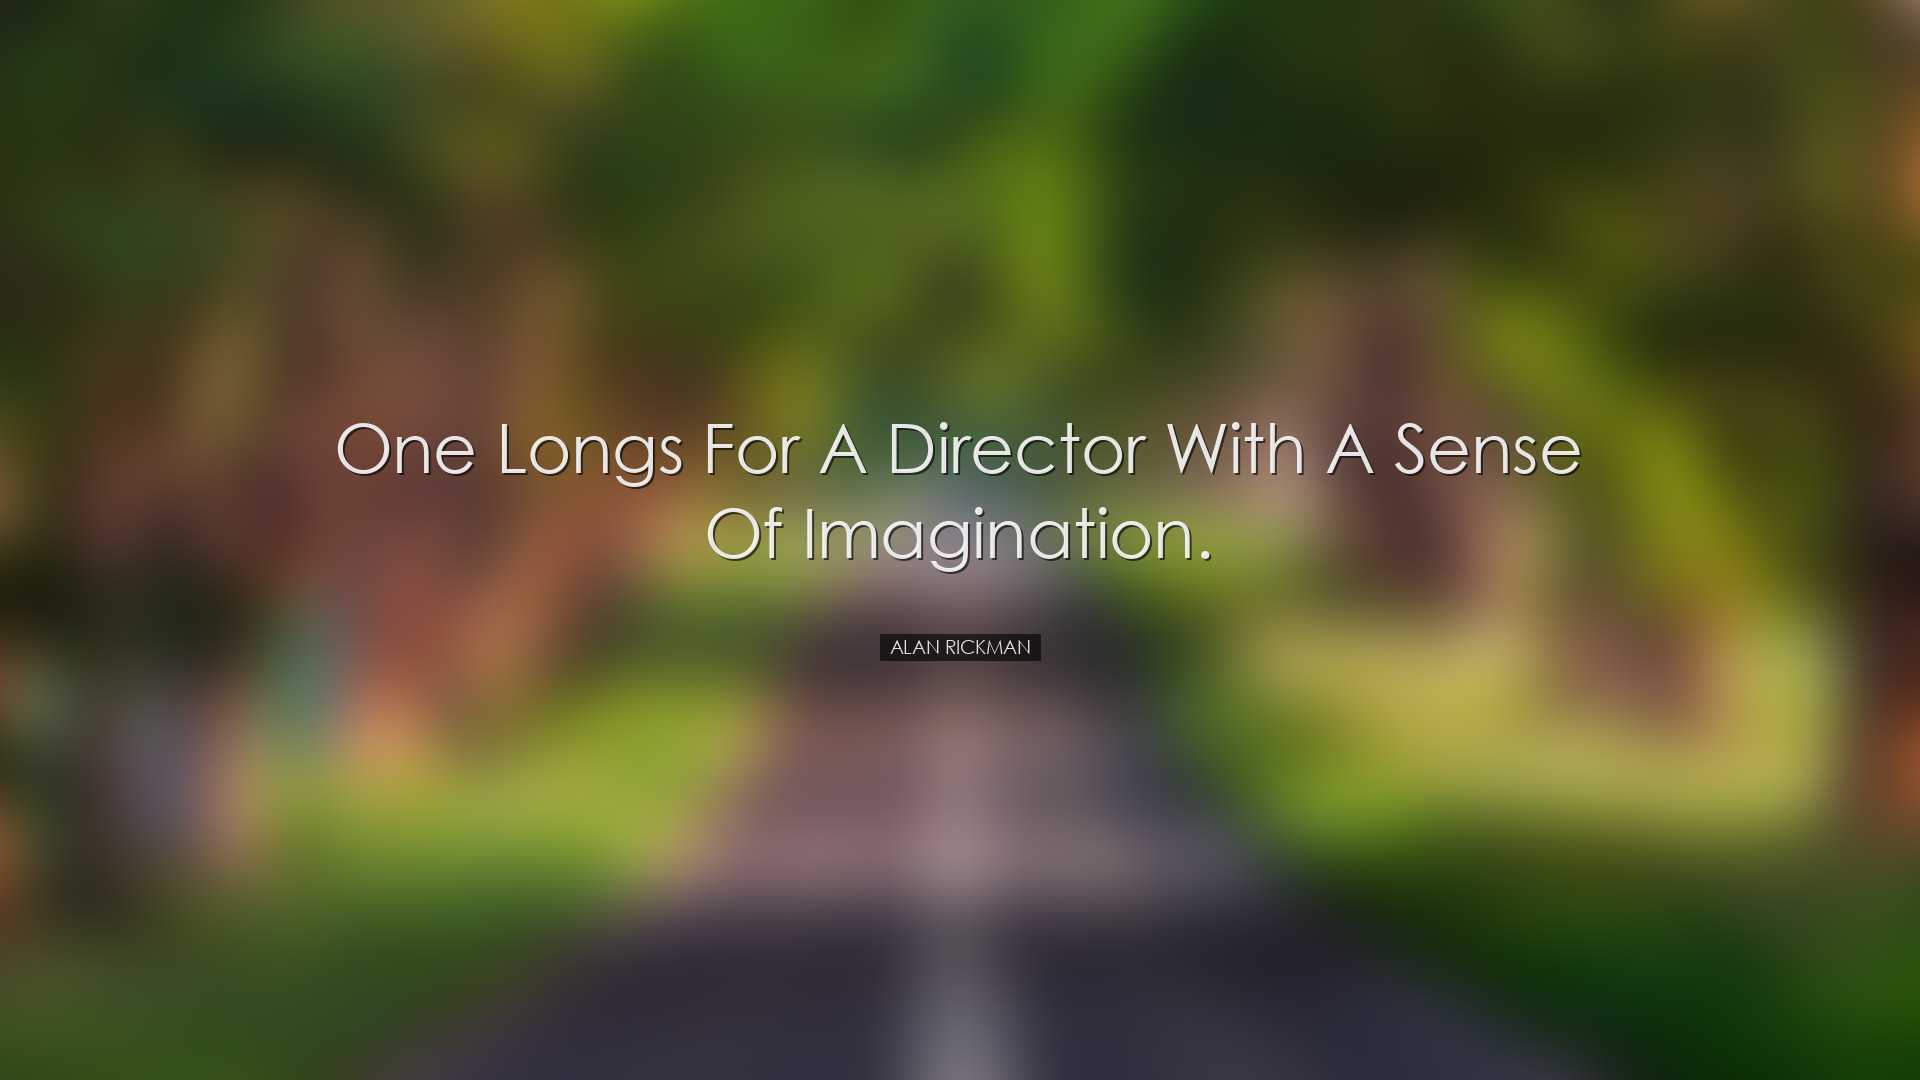 One longs for a director with a sense of imagination. - Alan Rickm